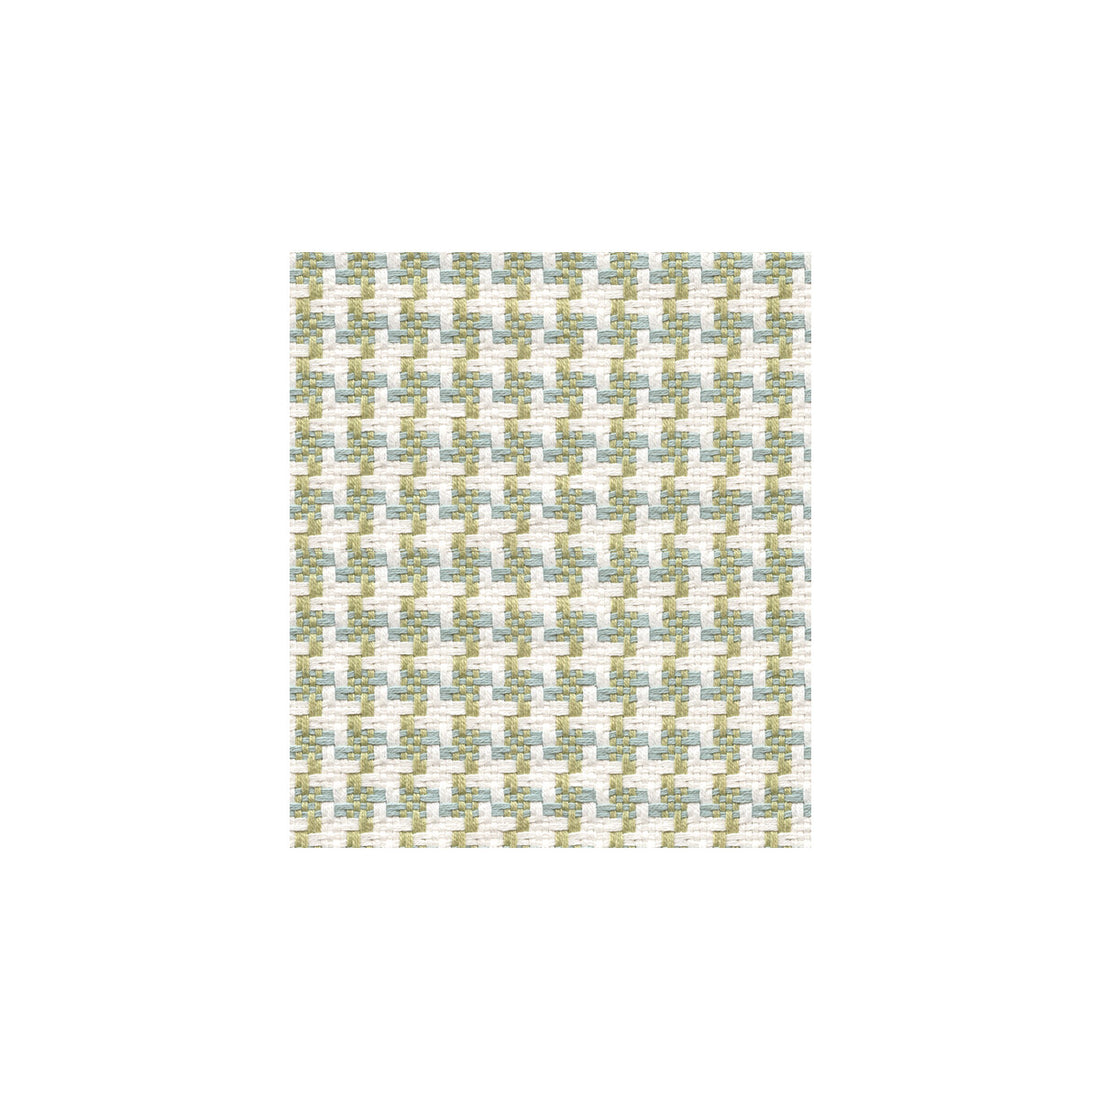 Huron fabric in meadow color - pattern 32993.315.0 - by Kravet Basics in the Sarah Richardson Affinity collection